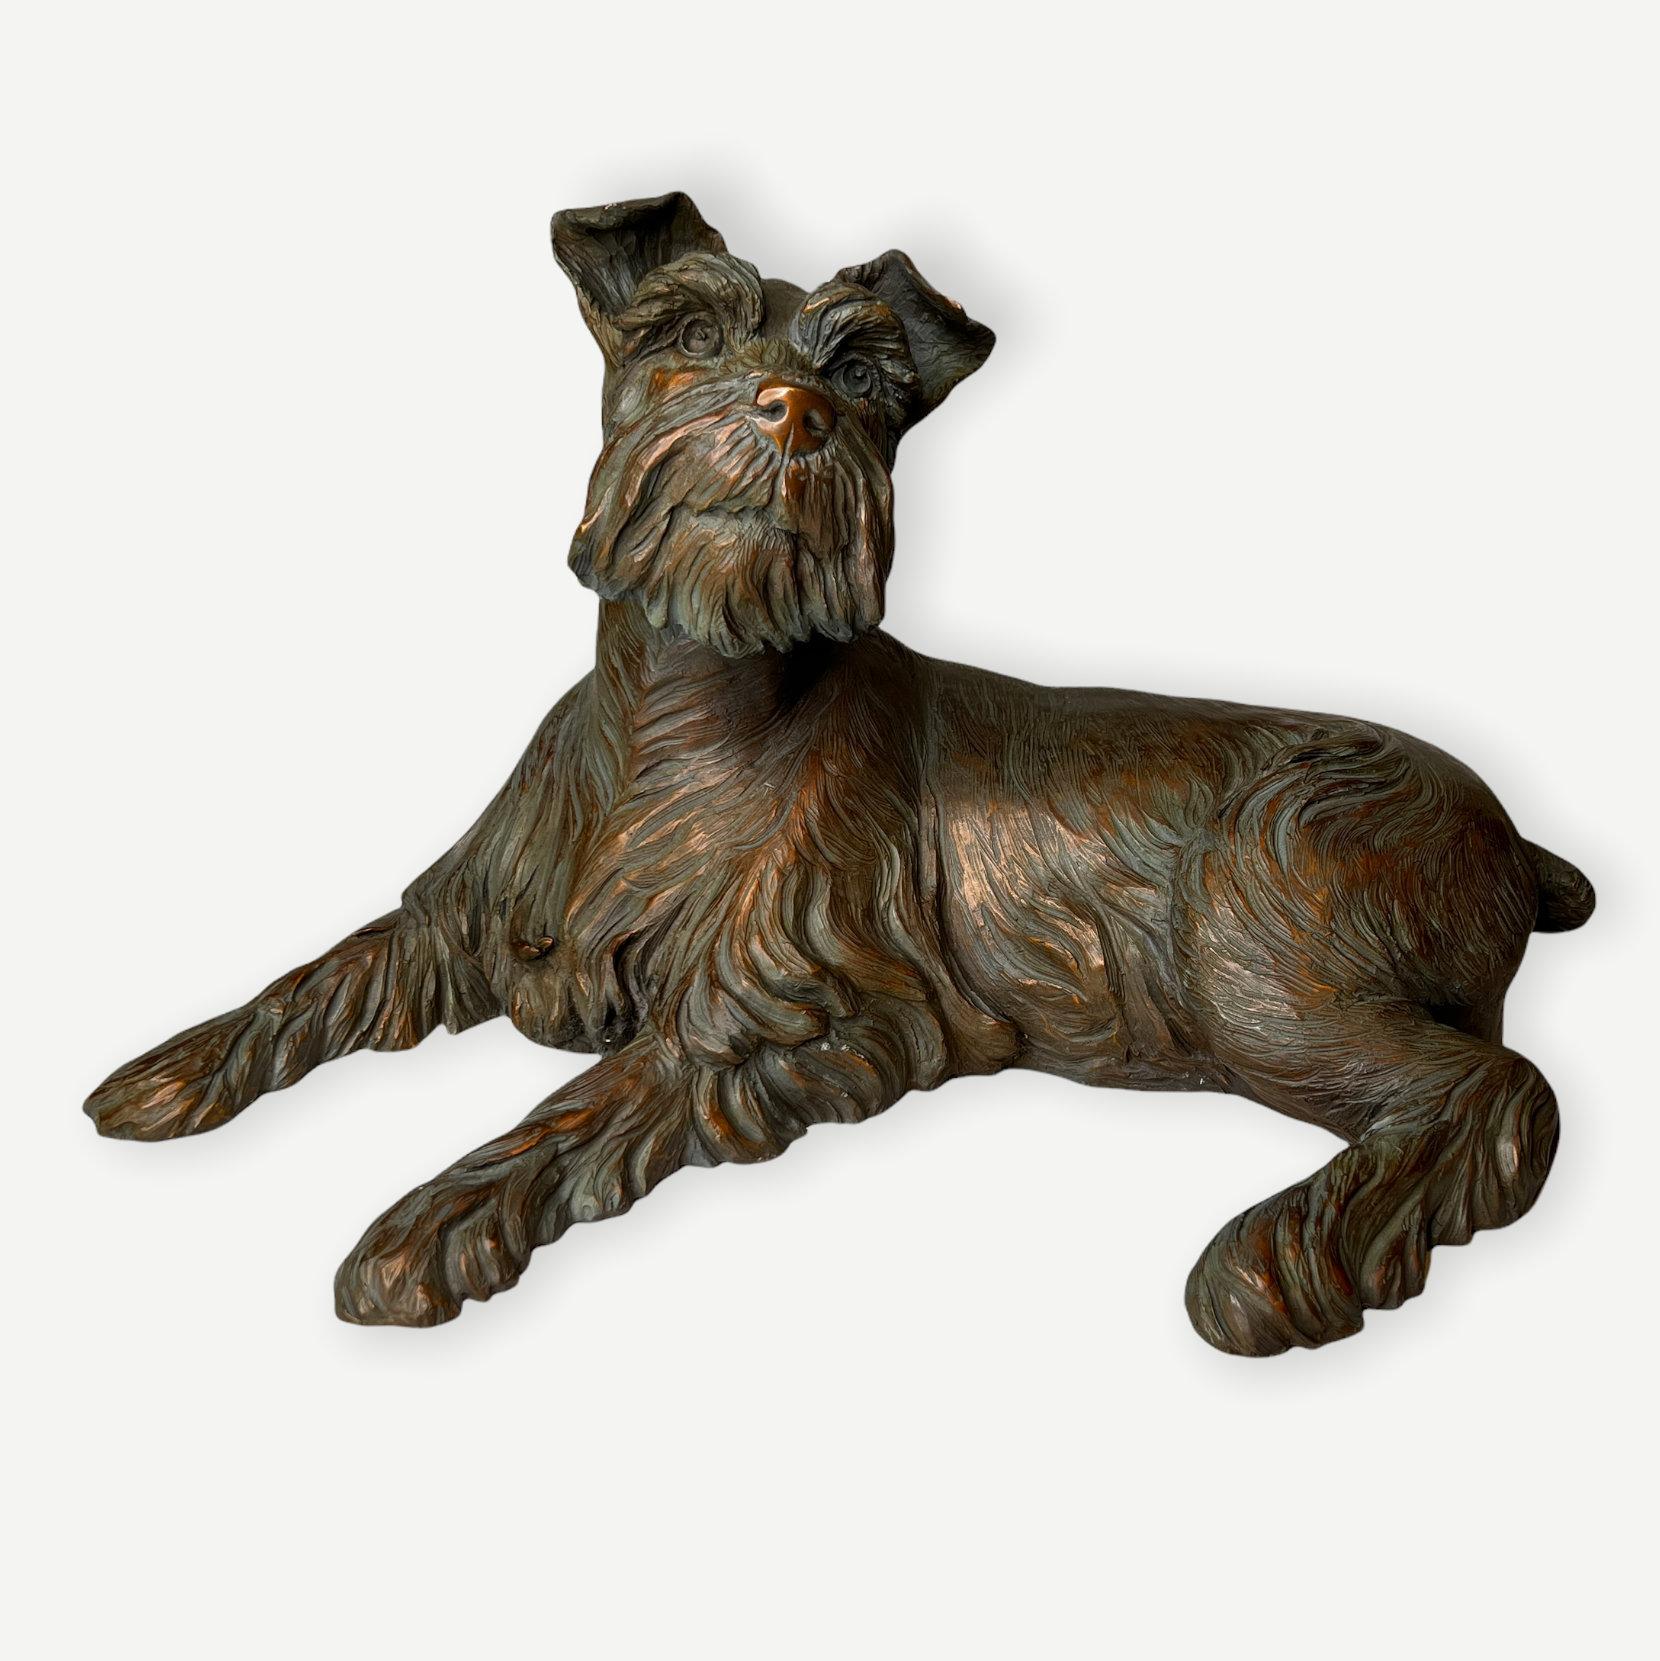 Jack Russell Terrier patinated bronze sculpture, signed G.L (or S.L.) Clark, 4/25, Santa Fe Bronze.